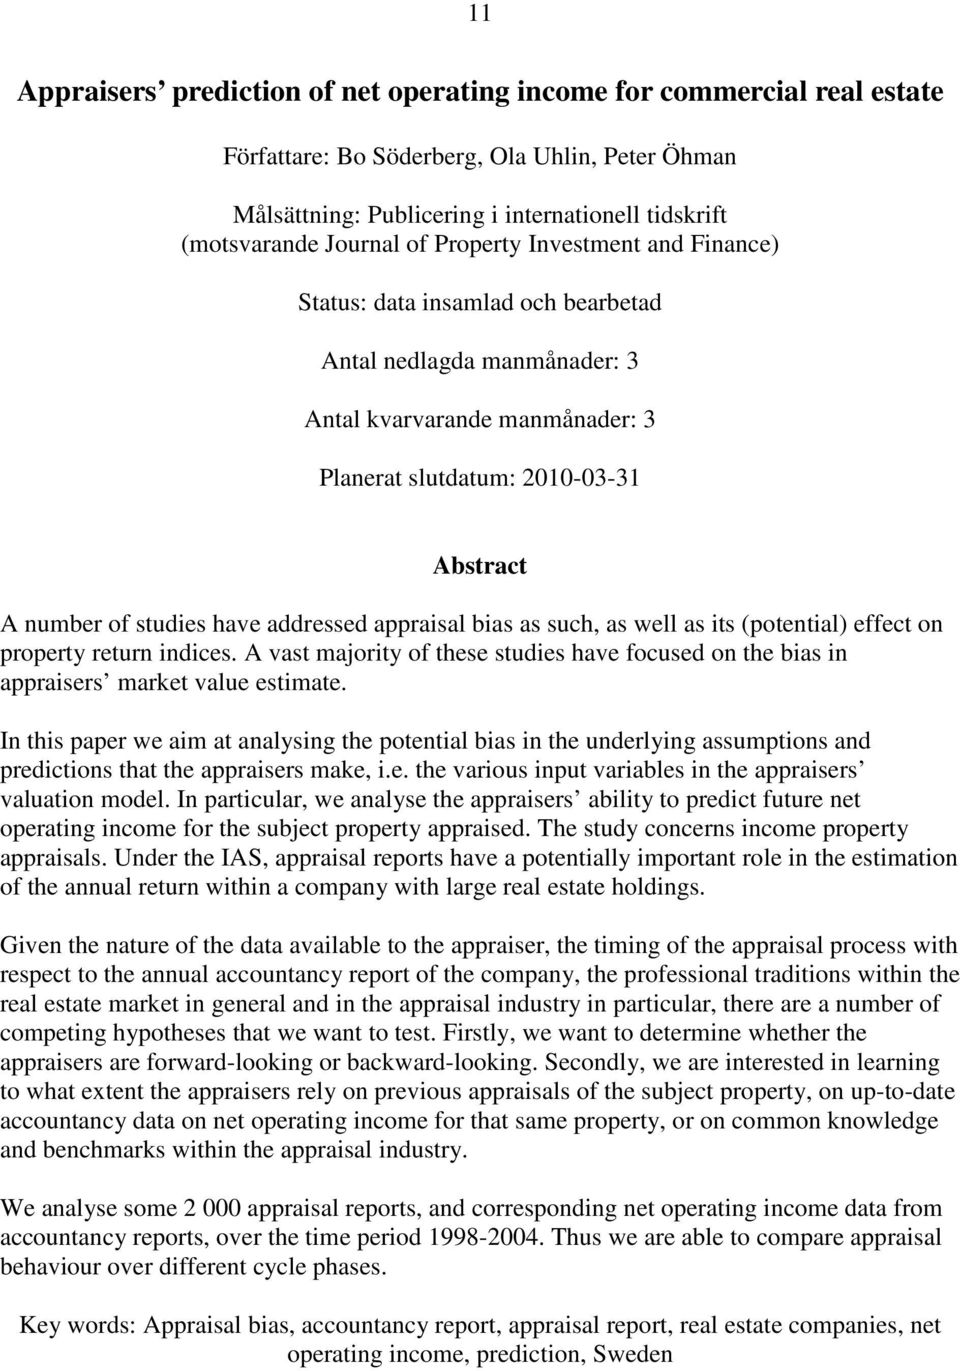 addressed appraisal bias as such, as well as its (potential) effect on property return indices. A vast majority of these studies have focused on the bias in appraisers market value estimate.